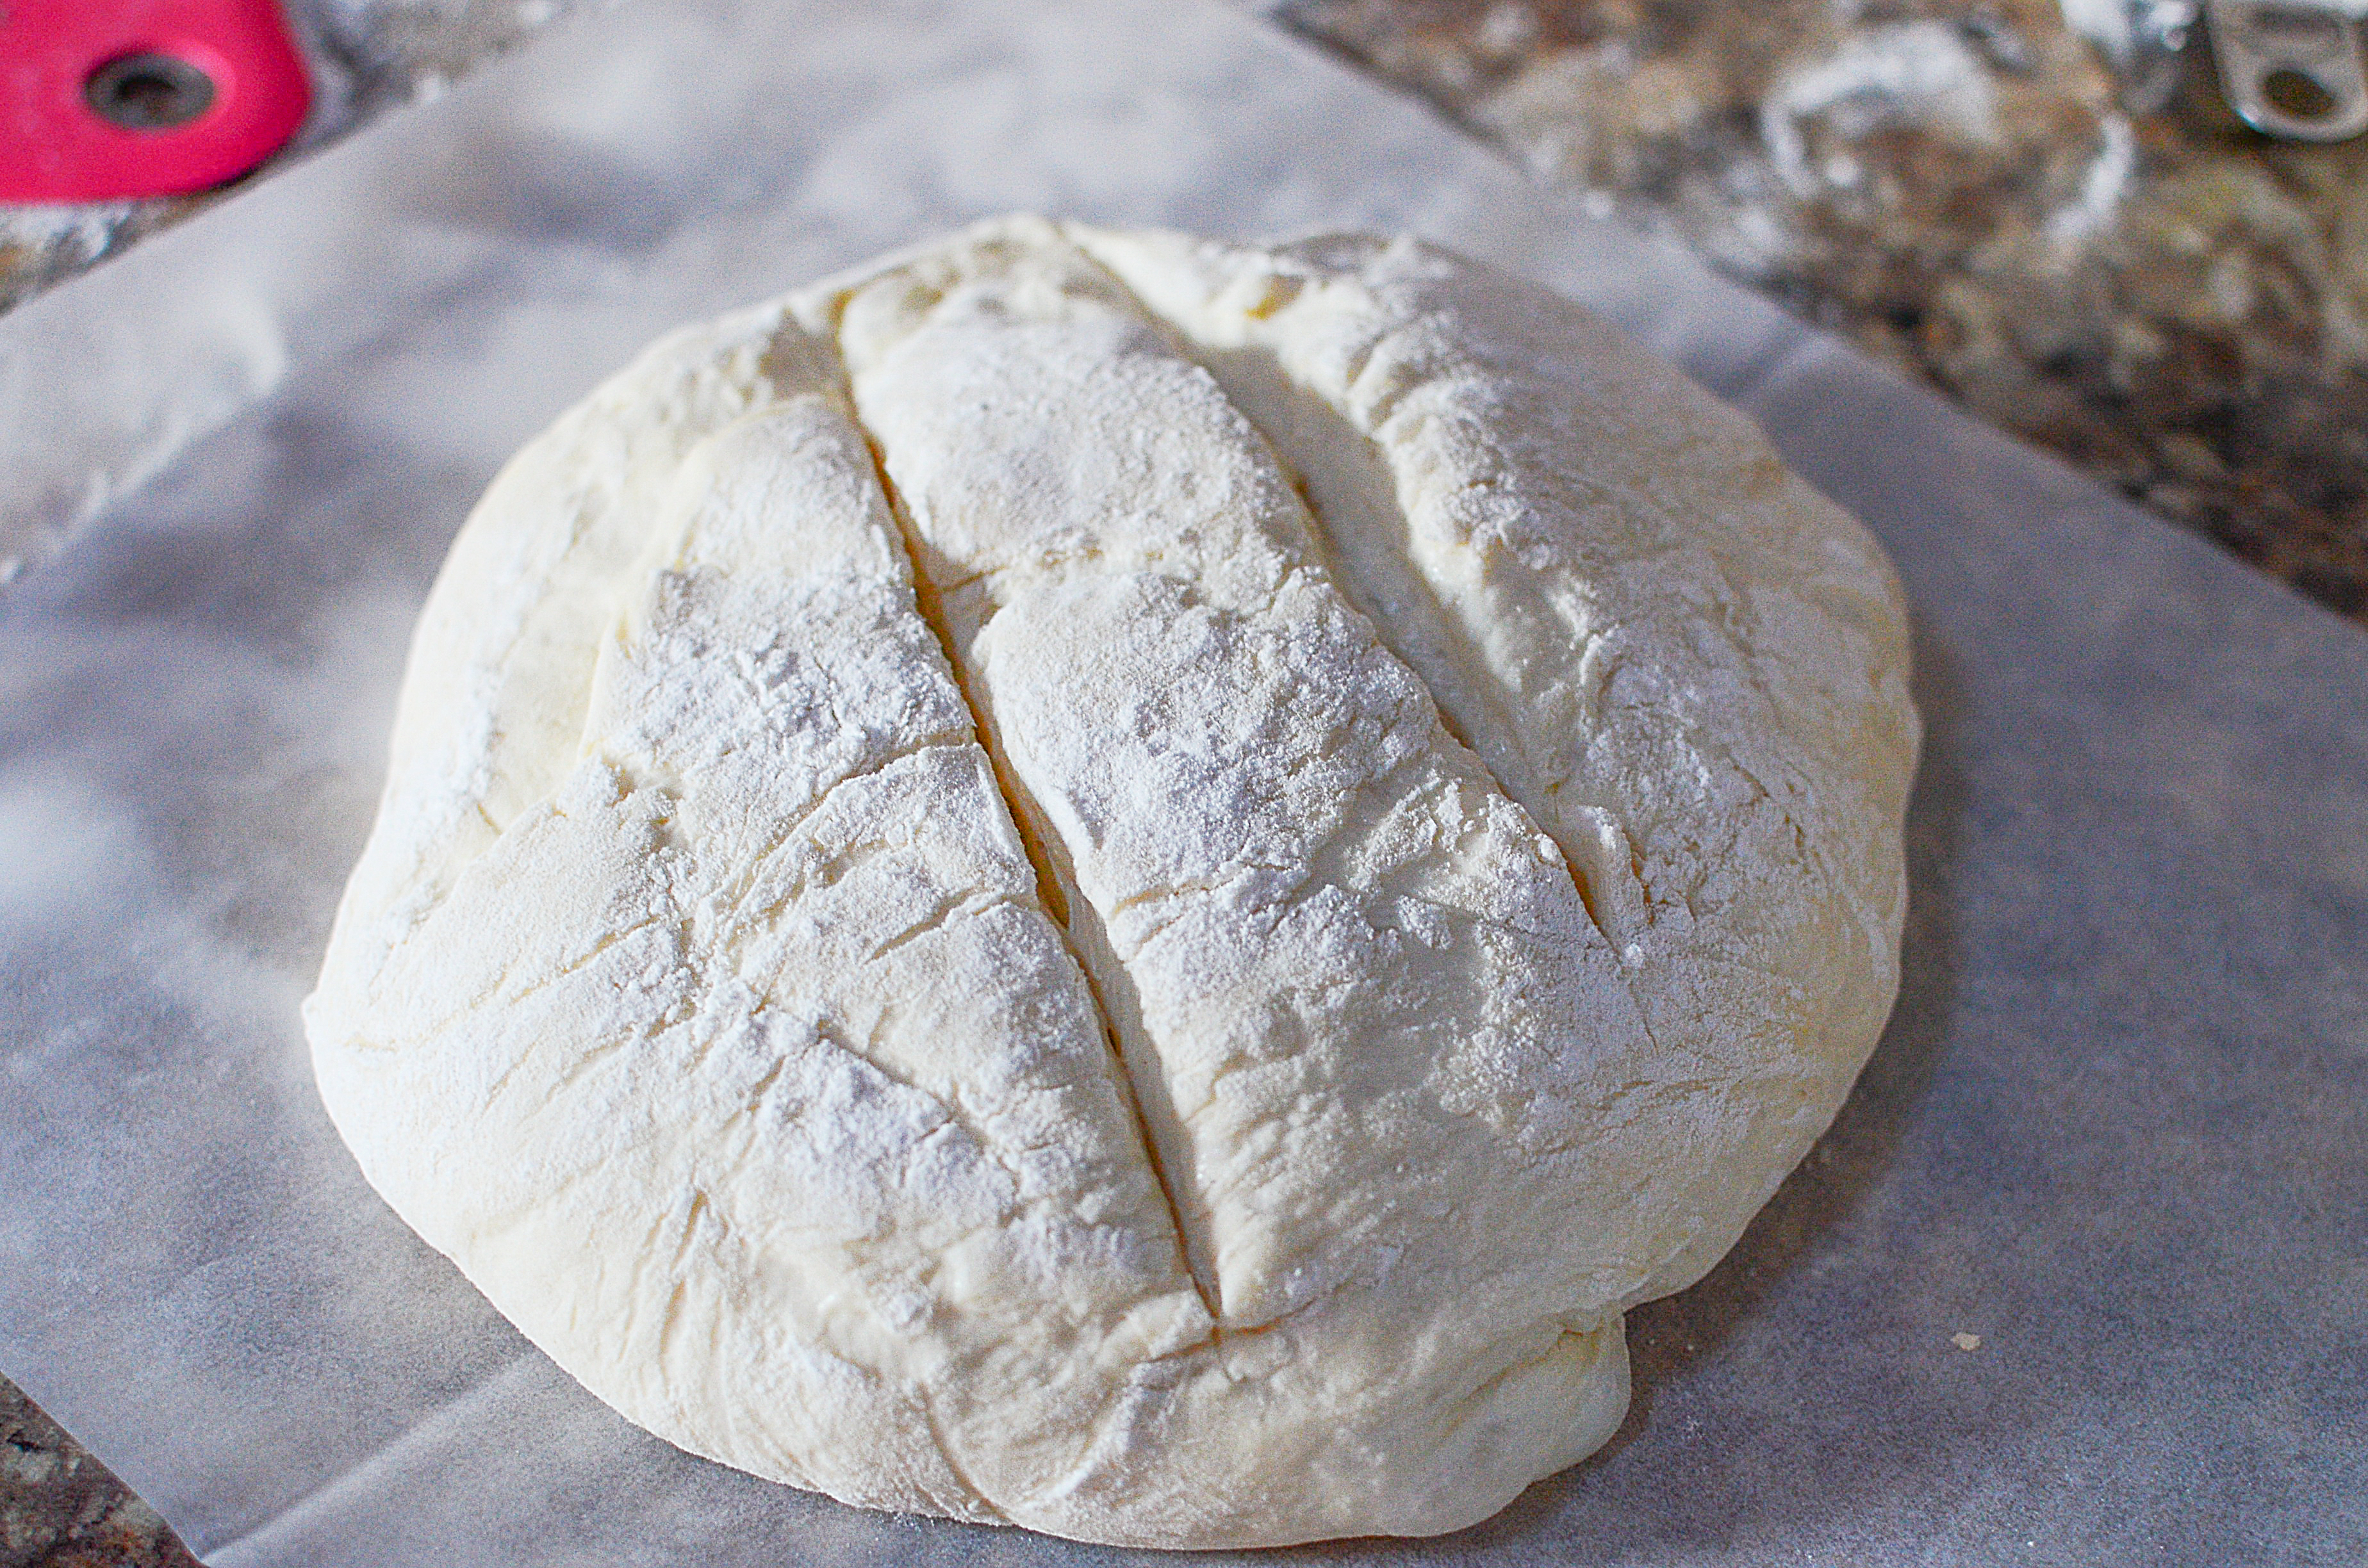 A round ball of bread dough sitting on parchment paper with two diagnal cuts in the top